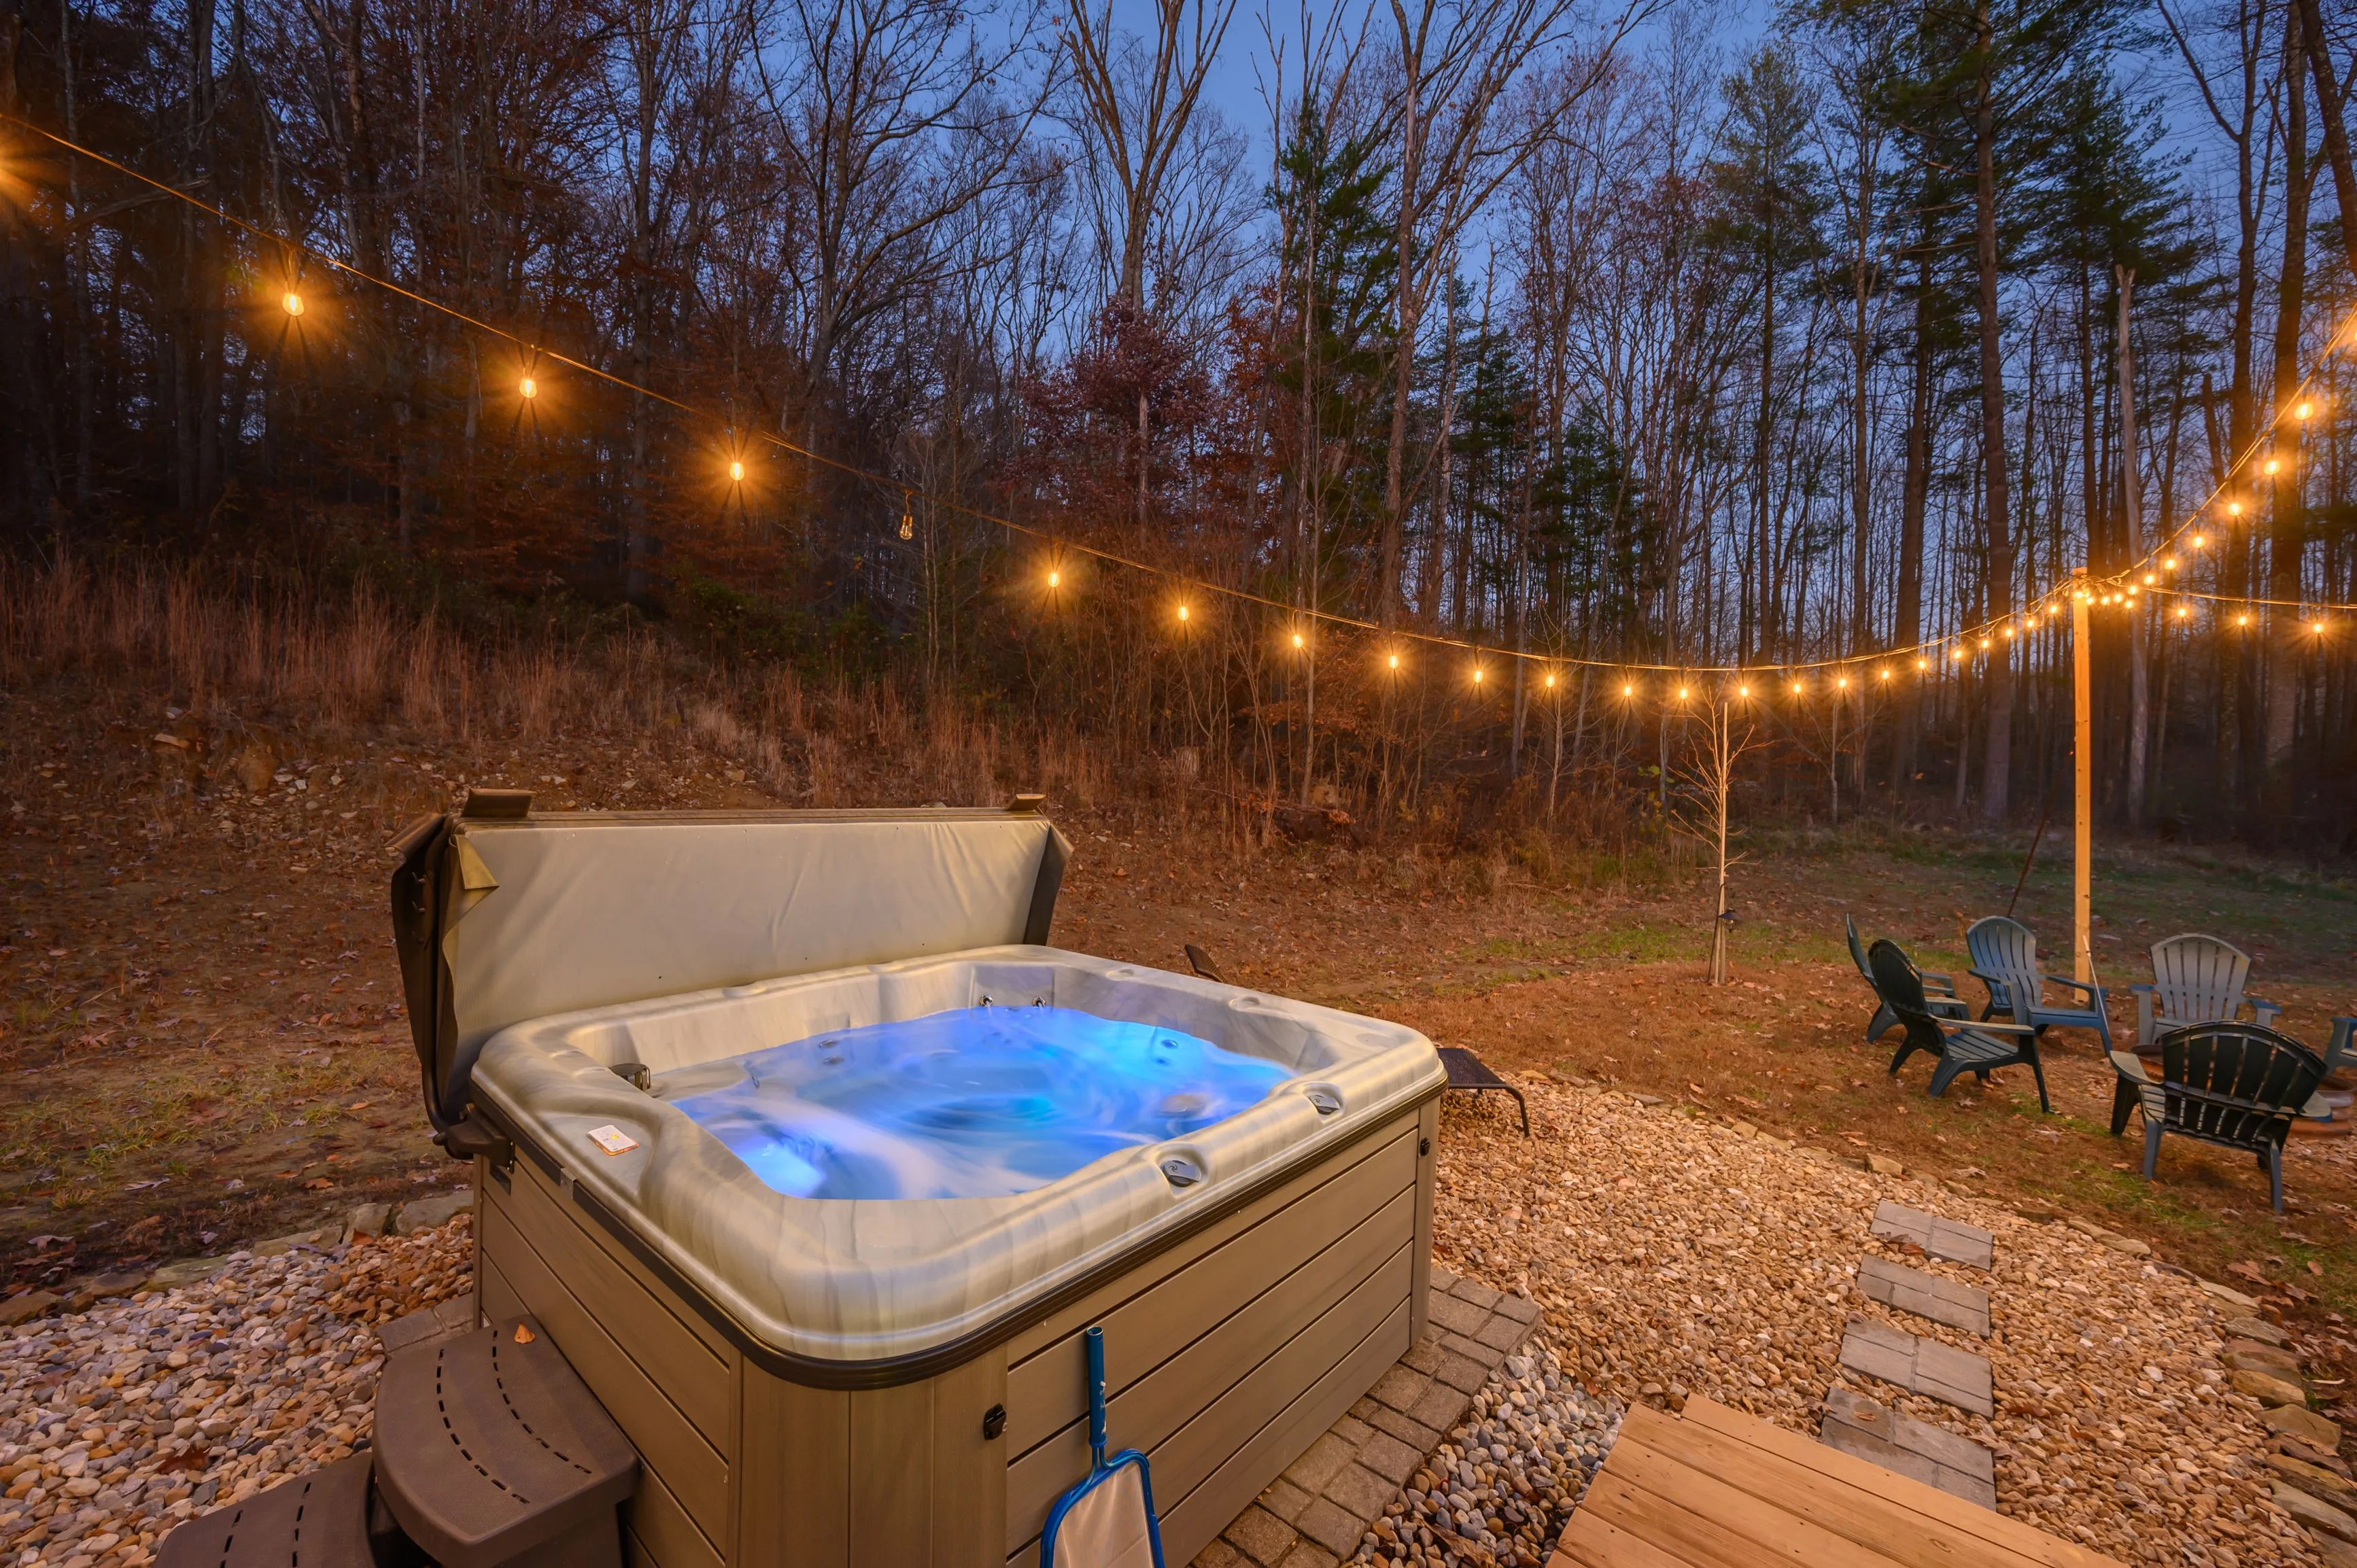 Outdoor hot tub with illuminated water, surrounded by string lights in a wooded backyard at dusk.